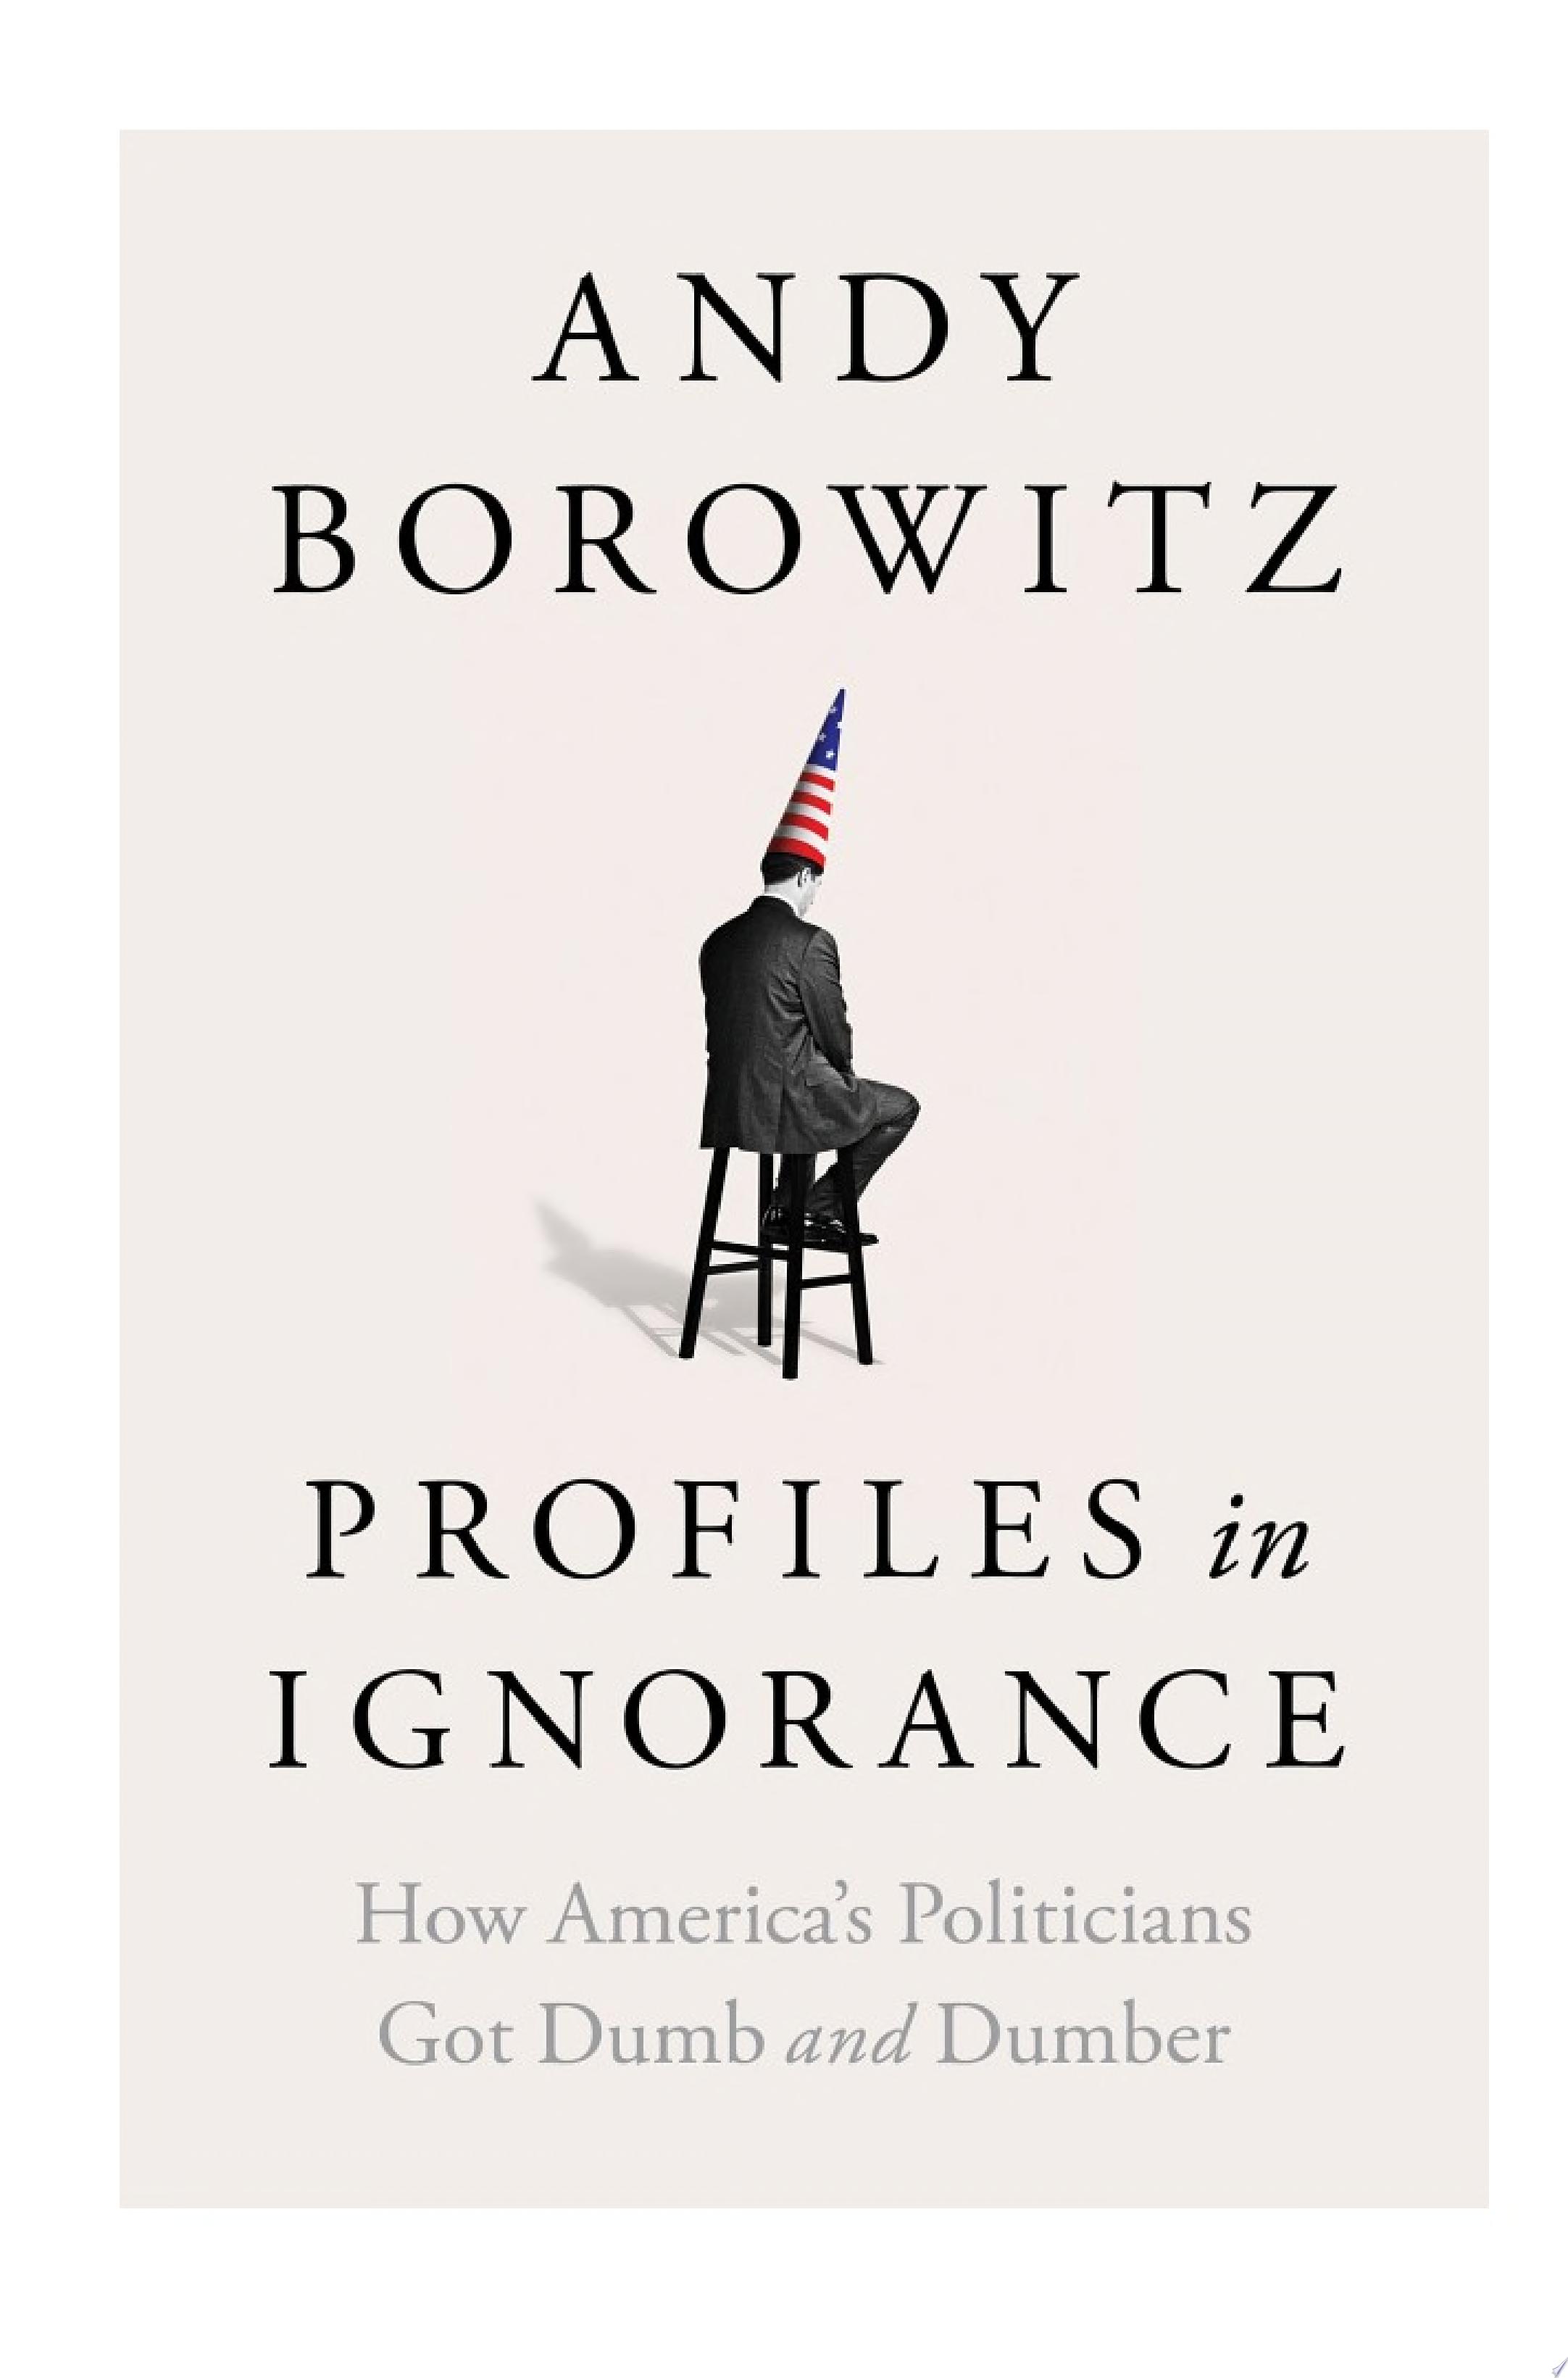 Image for "Profiles in Ignorance"